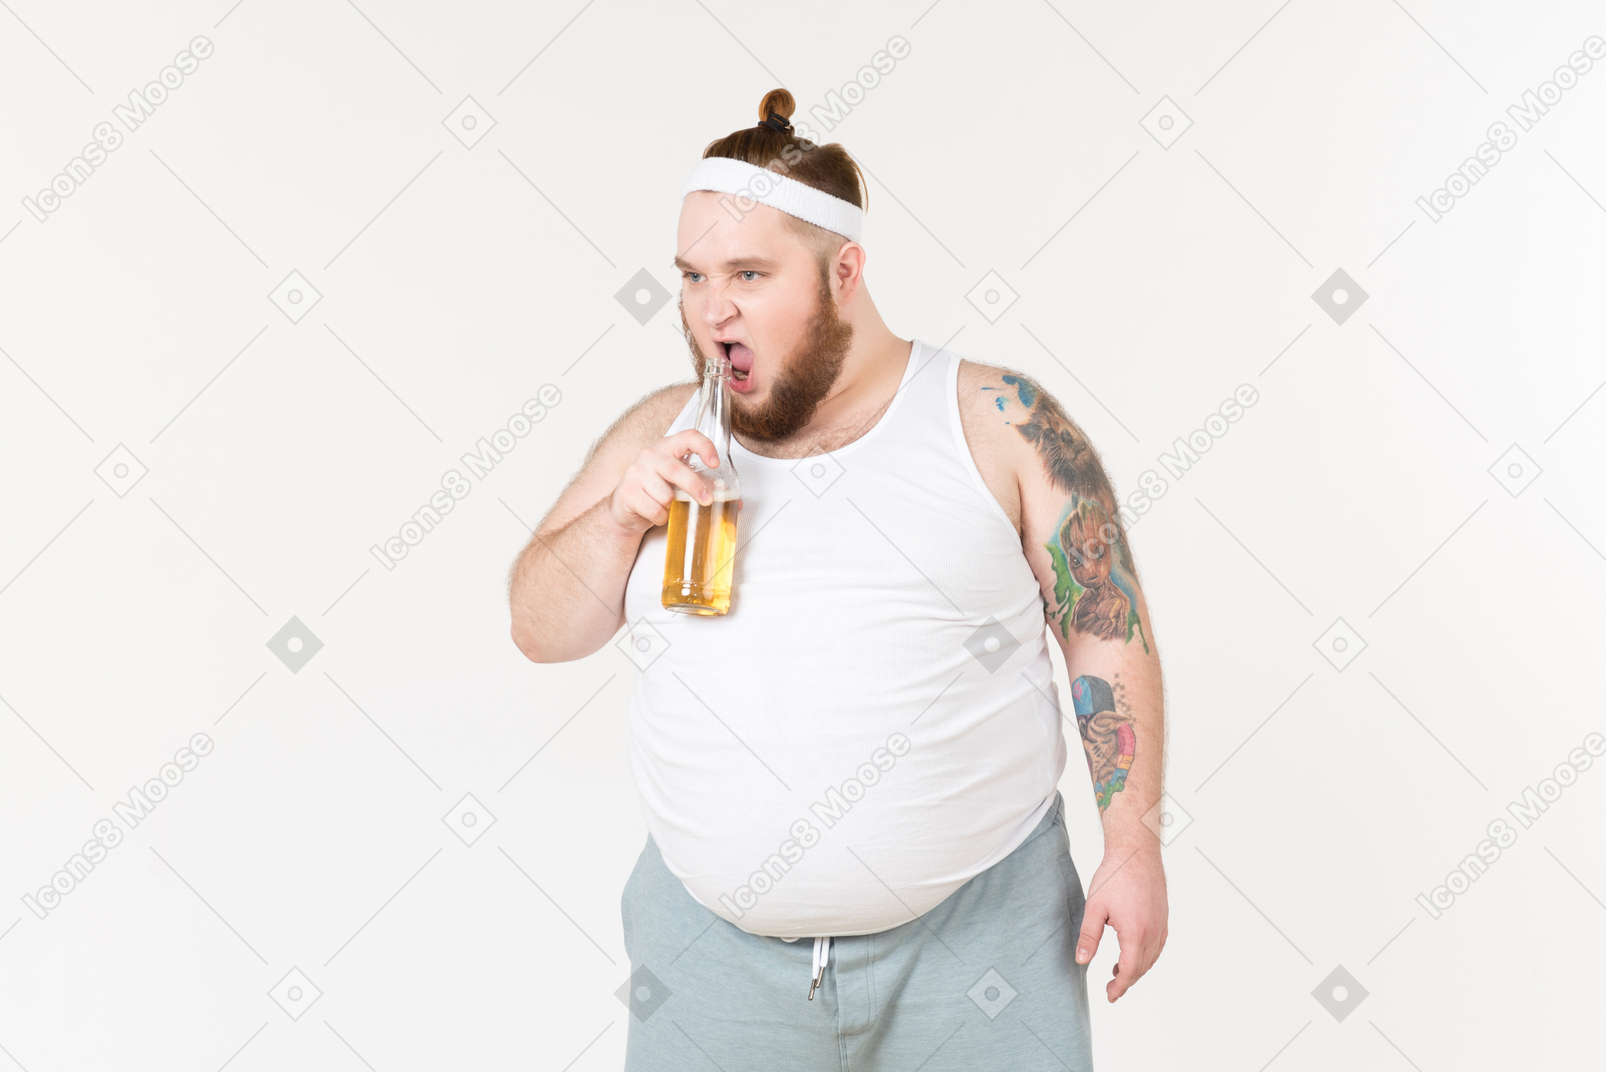 A fat man in sportswear going to drink some beer